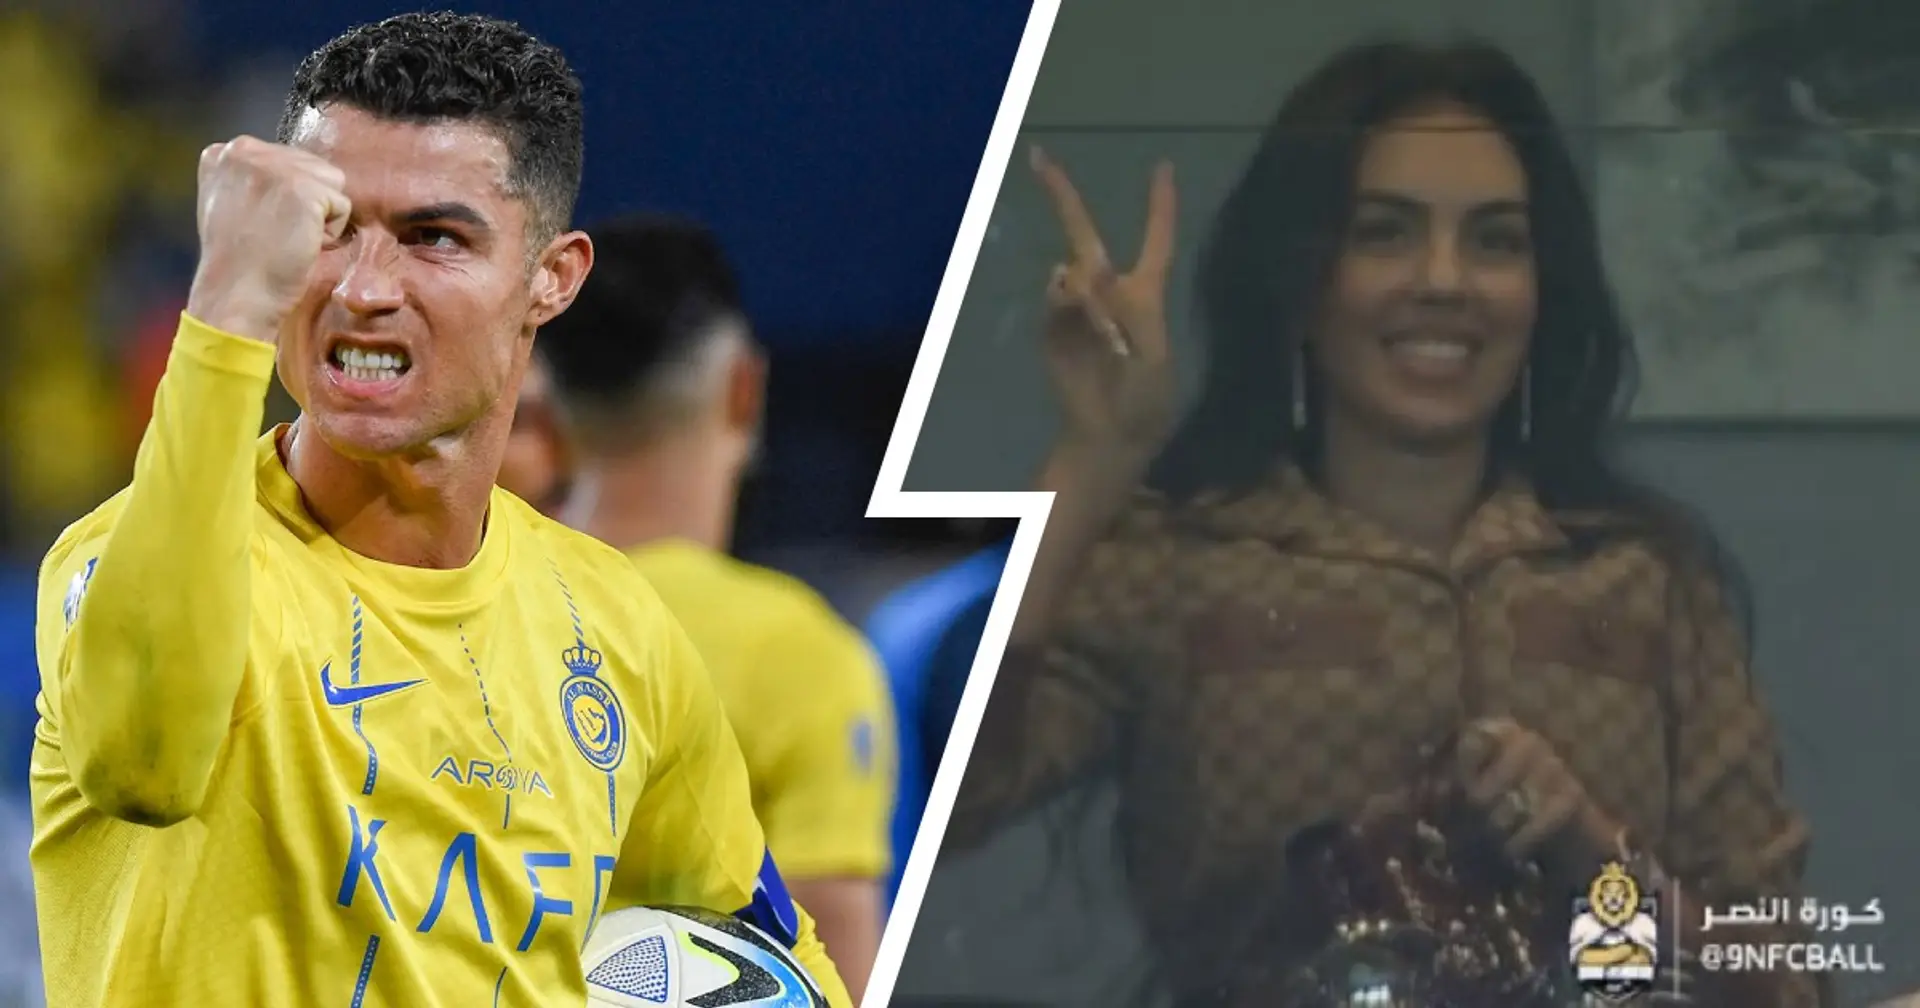 Ronaldo bags 64th career hat trick then gestures family - their reactions are priceless 